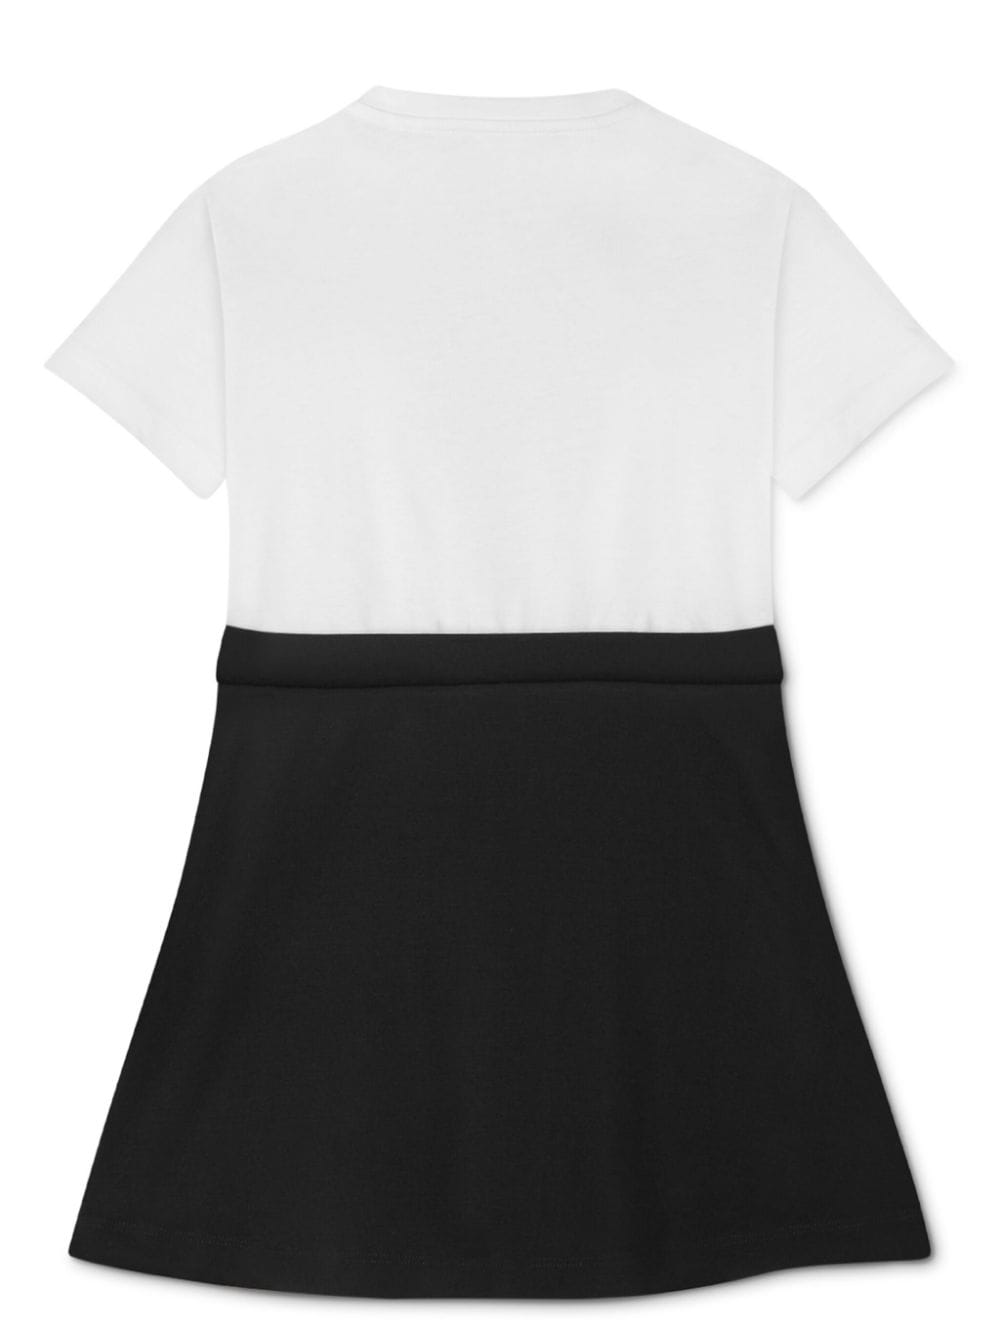 Black and white cotton dress for girls